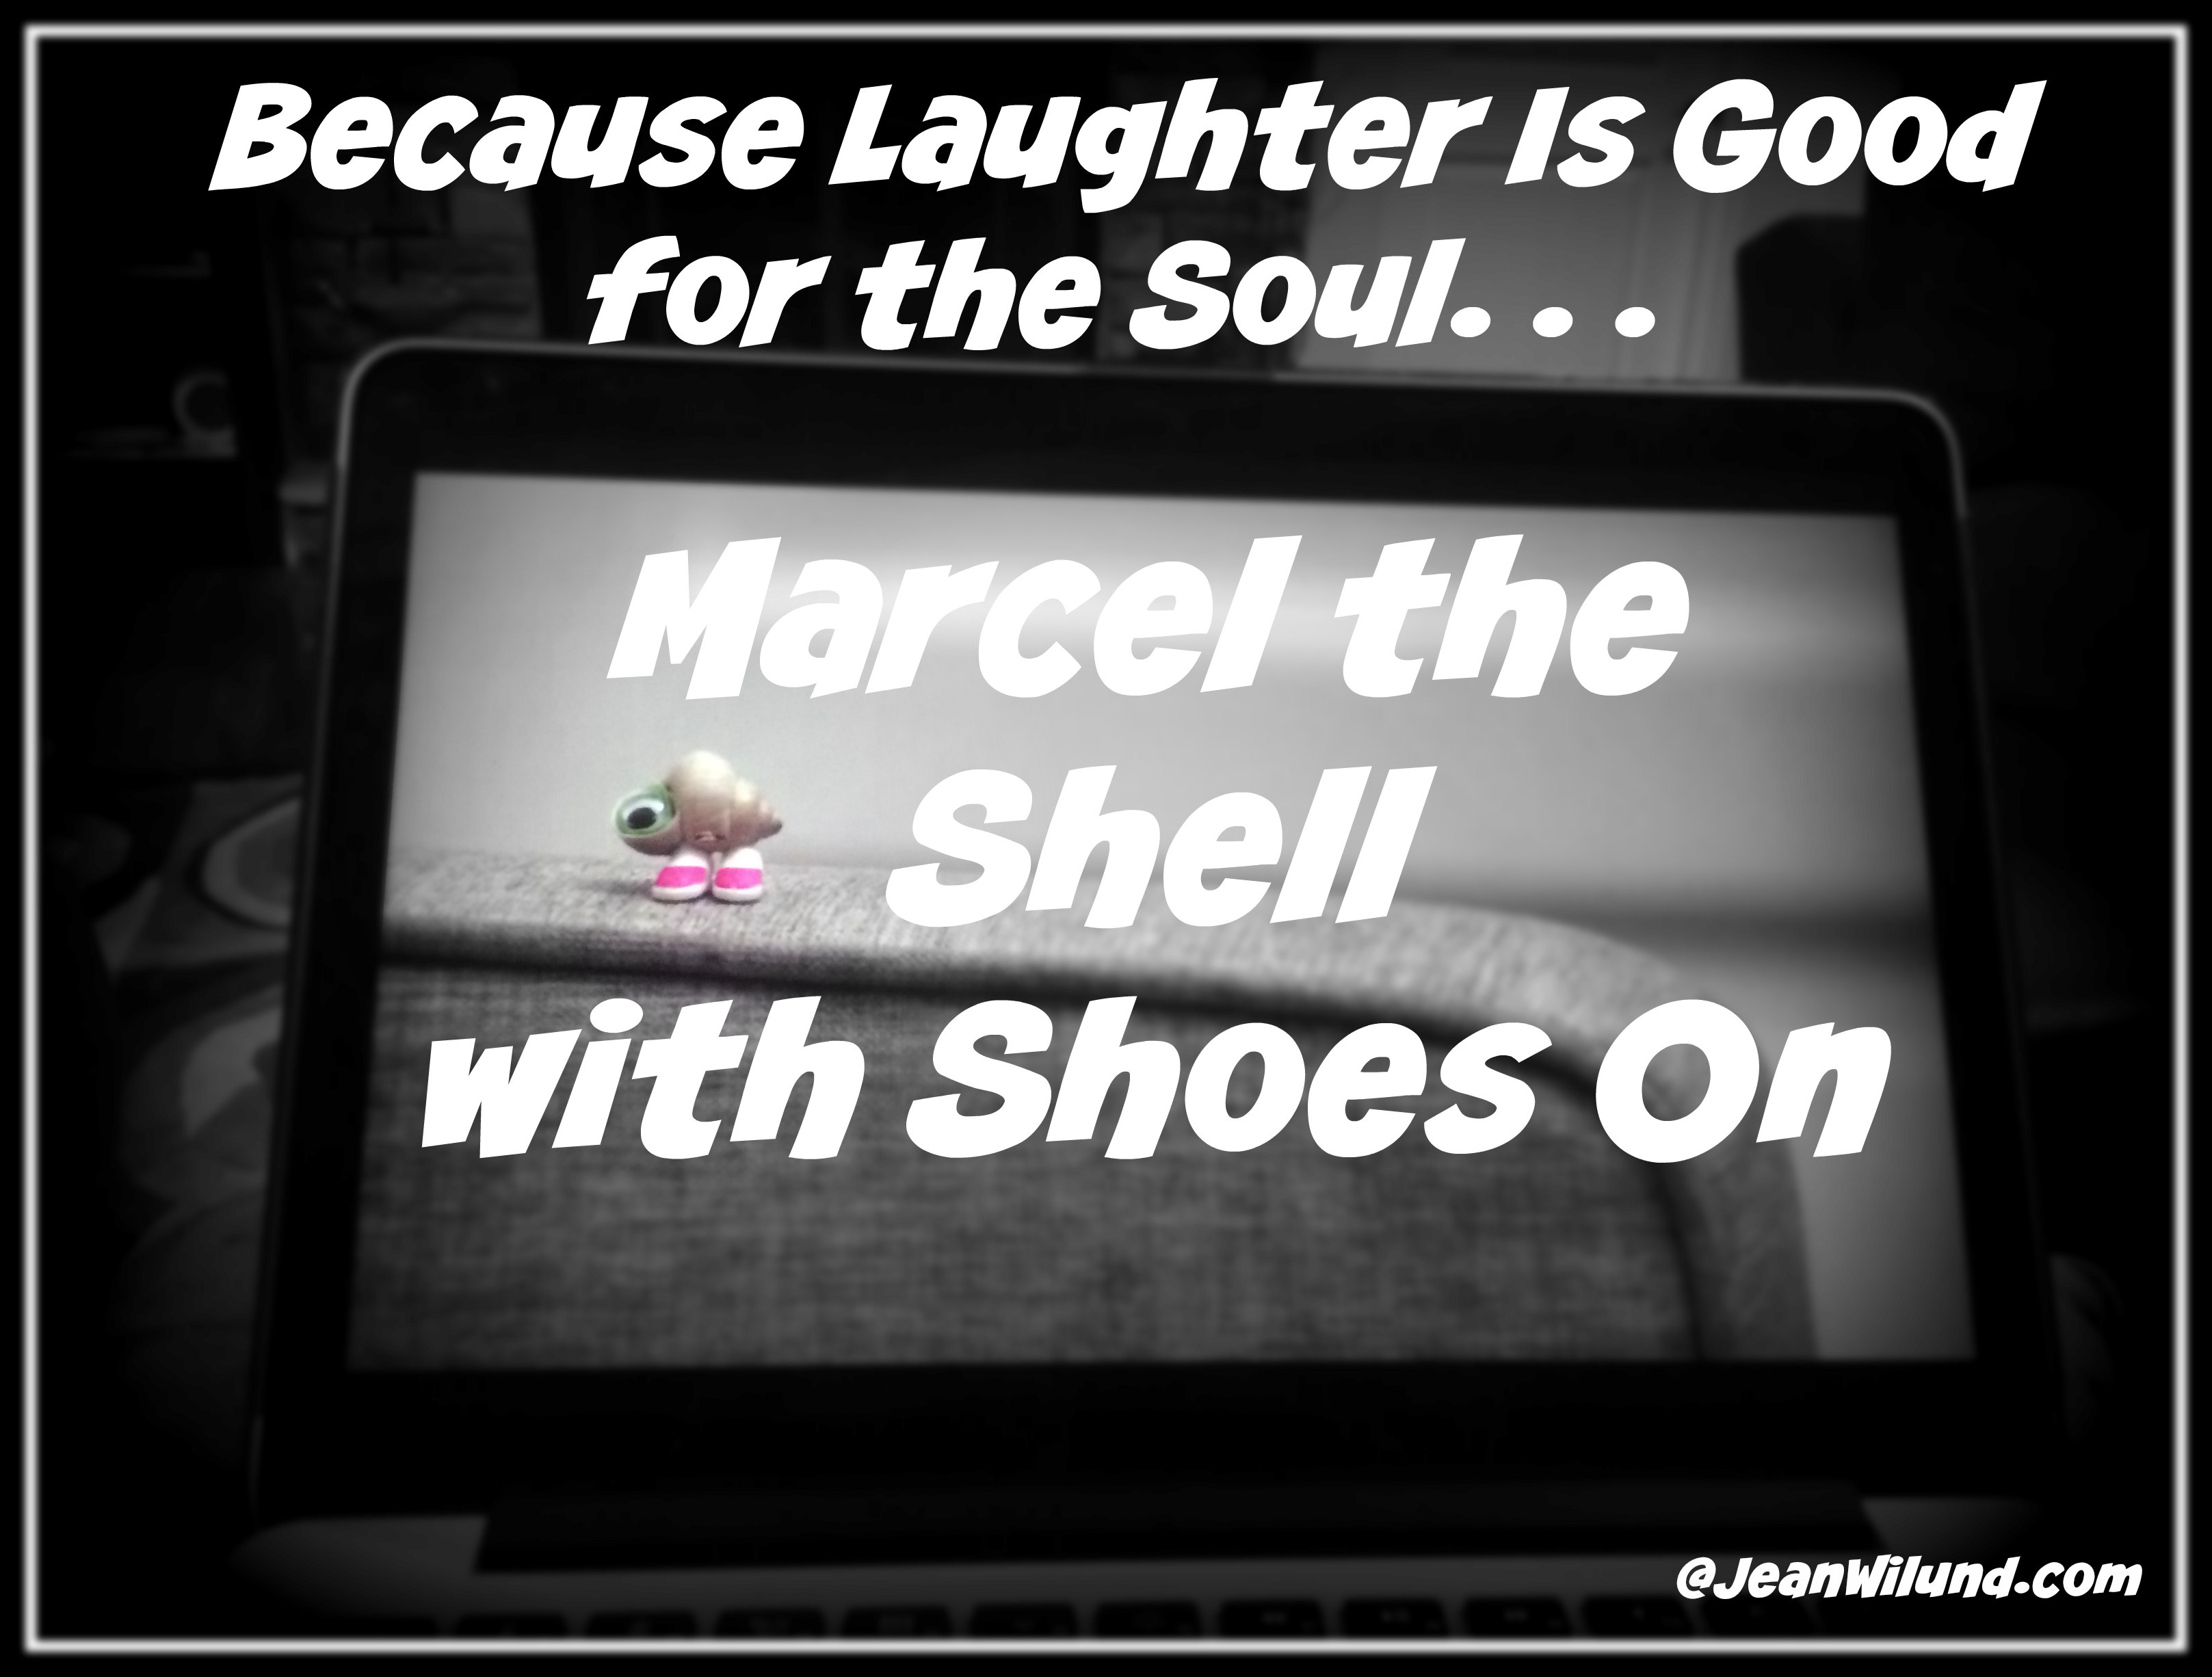 Because laughter is good for the soul, watch the hilarious video of Marcel the Shell with Shoes On.